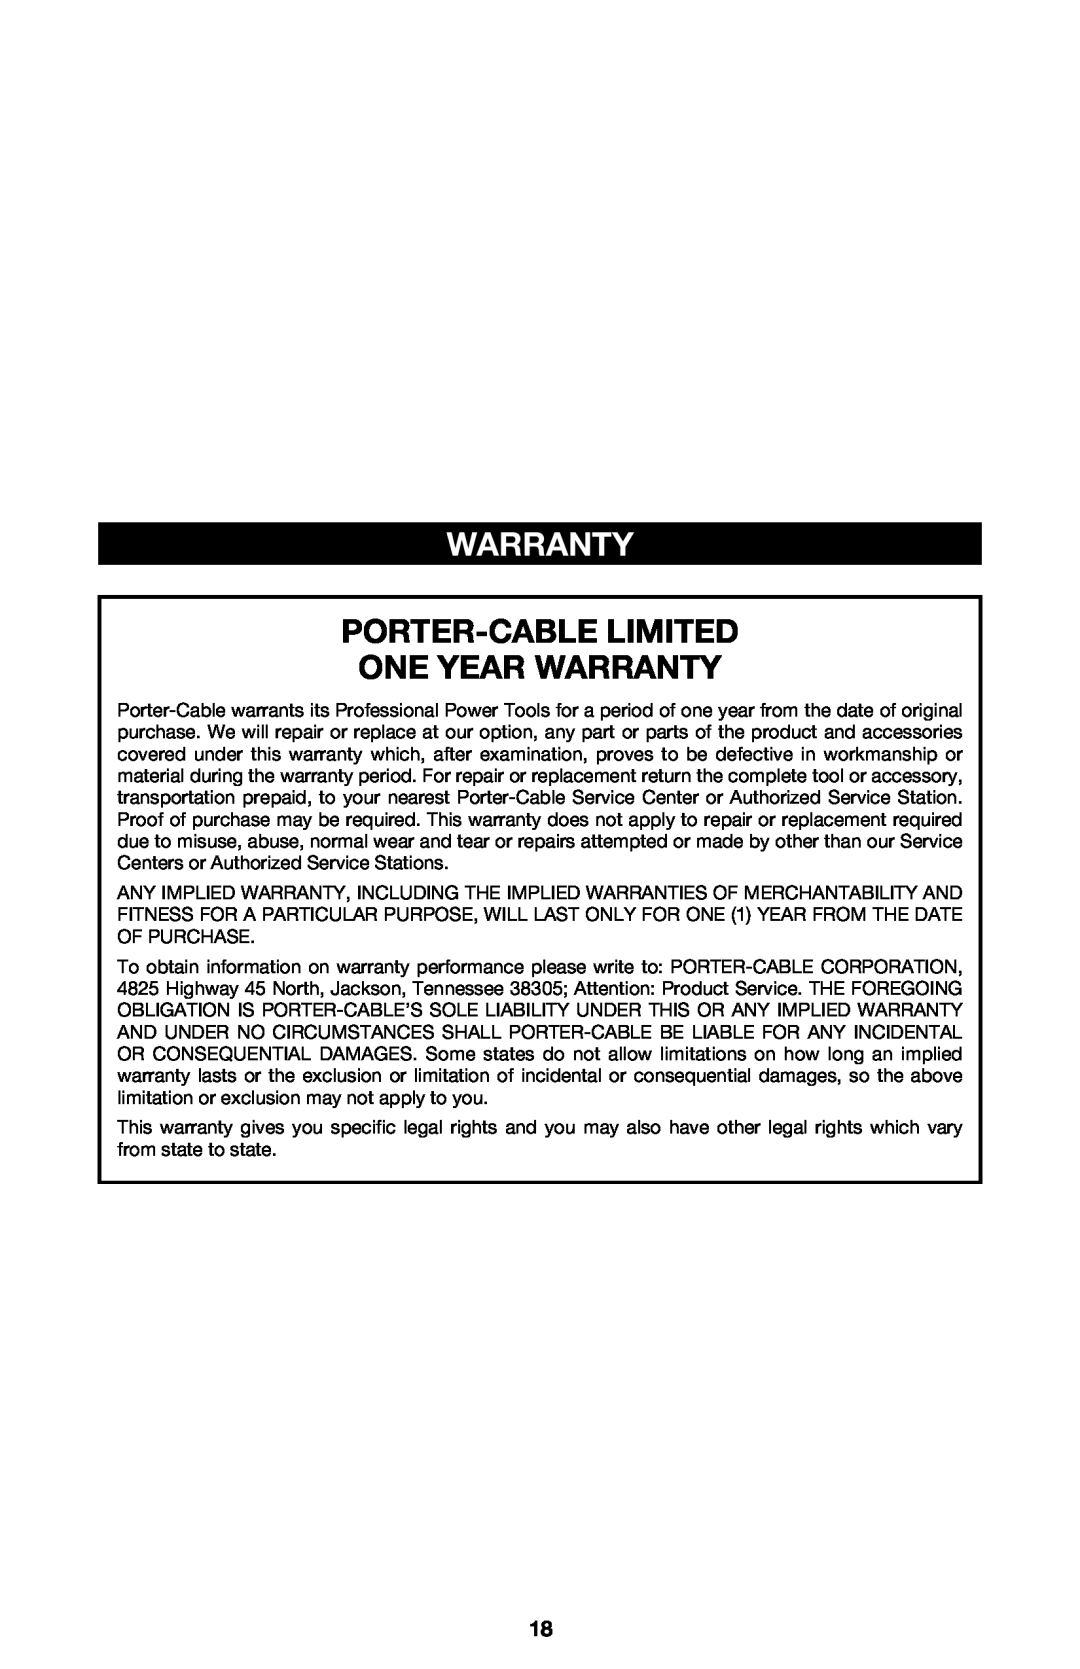 PYLE Audio 314 instruction manual Porter-Cable Limited One Year Warranty 